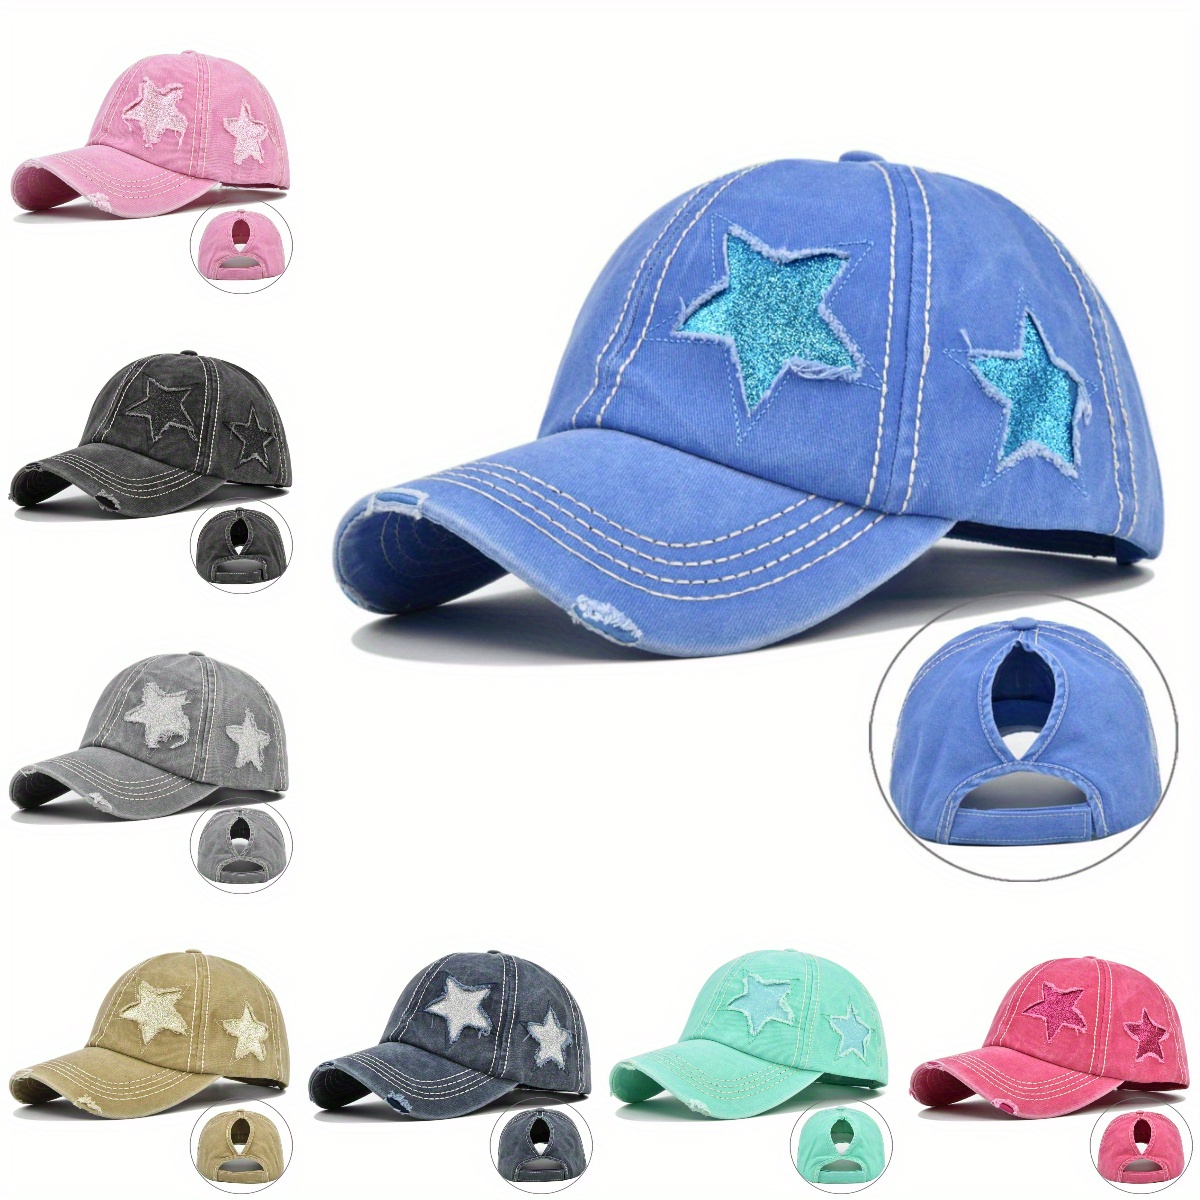 

Women's Distressed Washed Baseball Cap With Glitter Stars, Adjustable Ponytail Slot, Stylish Sun Protection Peaked Hat For Outdoor Cycling And Hiking Gifts For Eid Music Festival